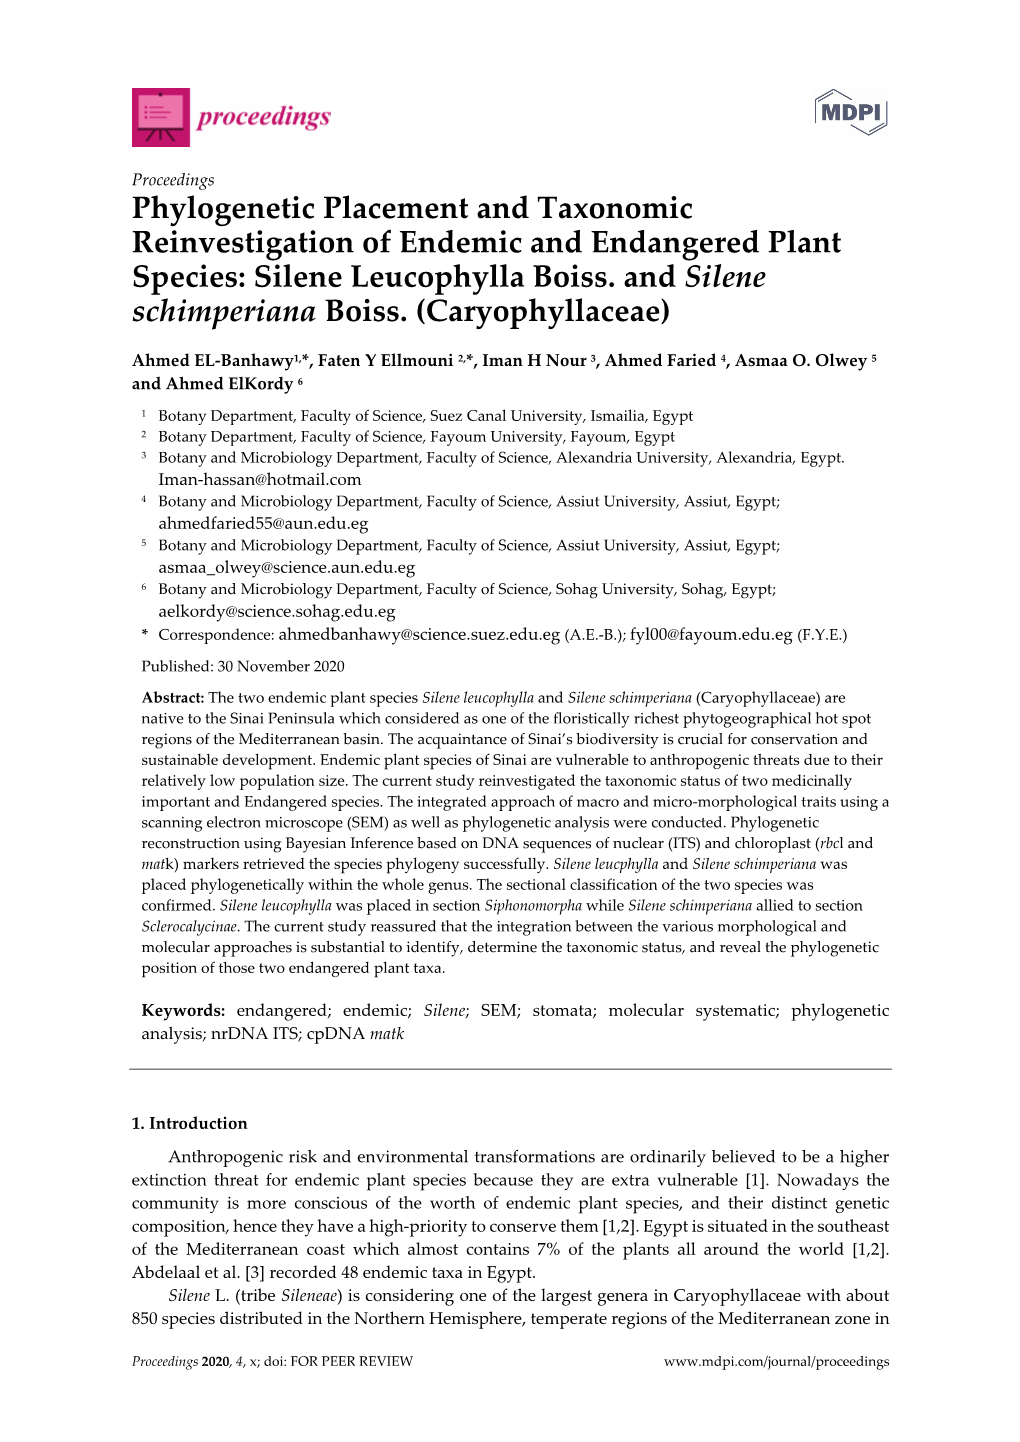 Phylogenetic Placement and Taxonomic Reinvestigation of Endemic and Endangered Plant Species: Silene Leucophylla Boiss